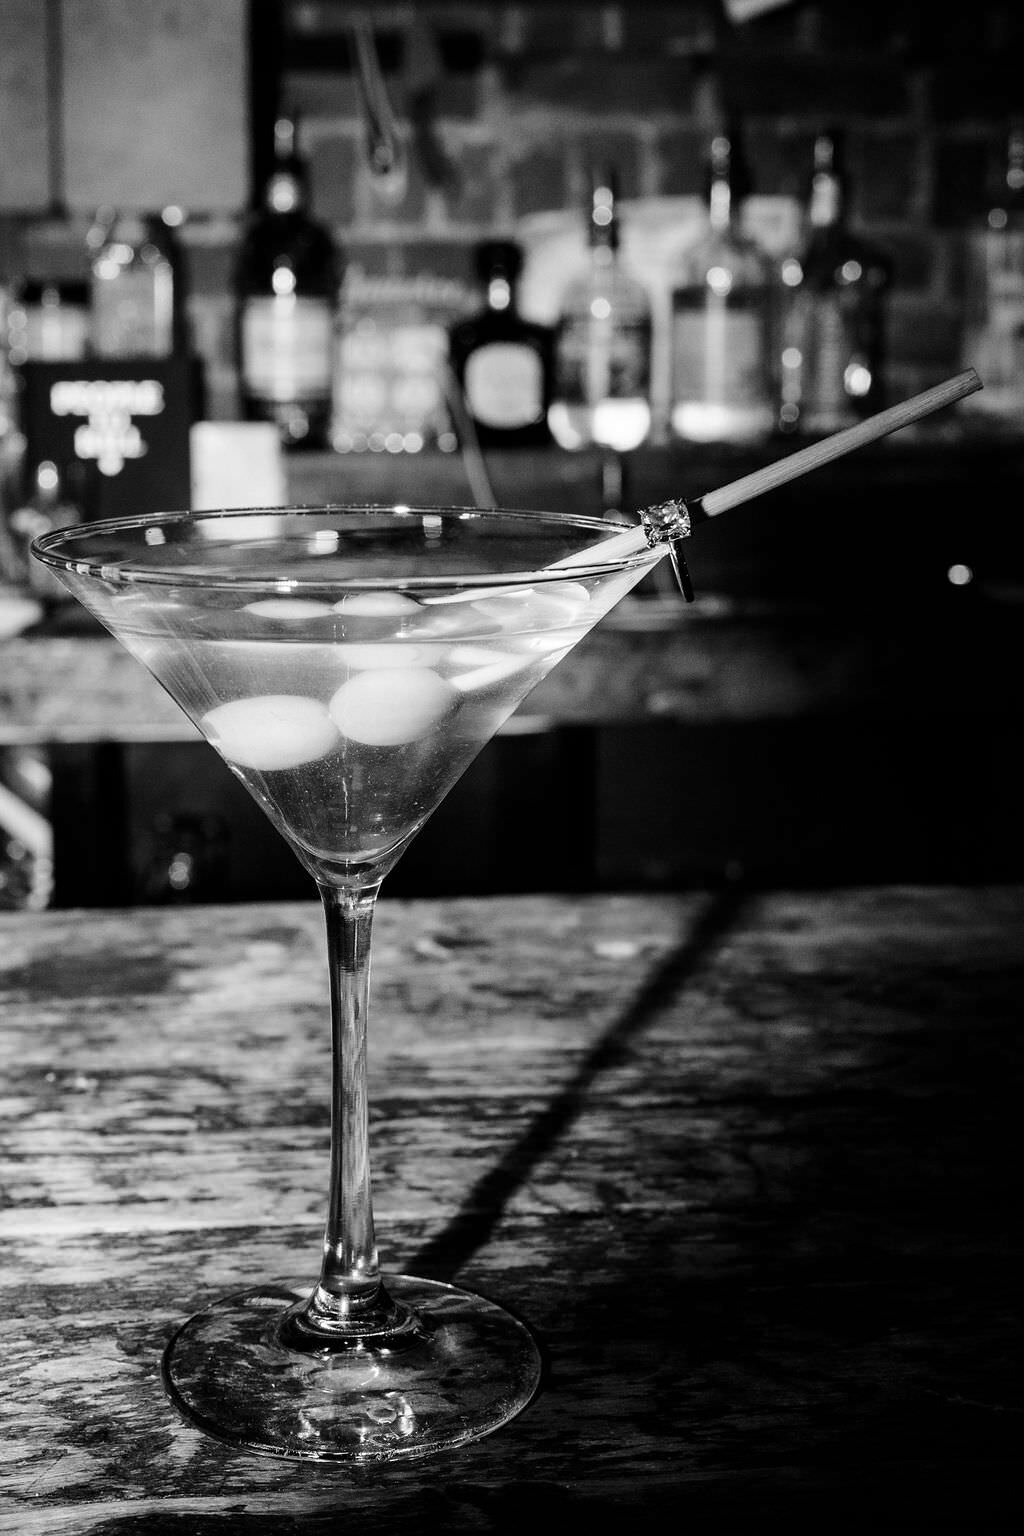 black and white photo of a martini glass with two olives in it on a bar